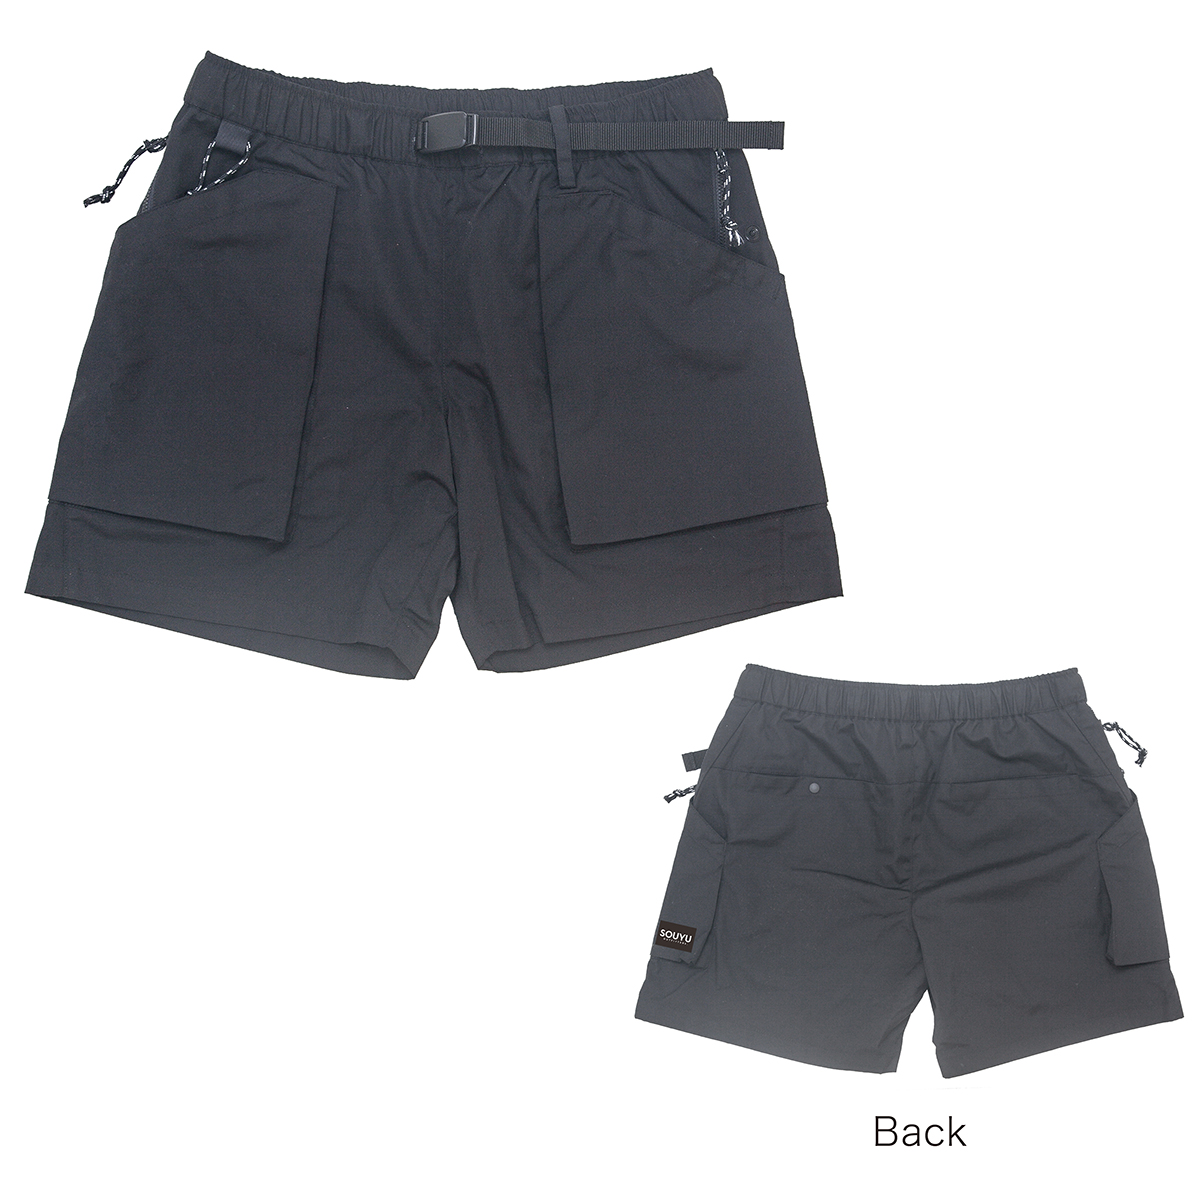 PLAYERS SHORT プレイヤーズショーツ Number : s20-so-02 Fabric : Polyester 65% Cotton 35% Size : S, M, L, XL Color:Black Price : ¥12,800